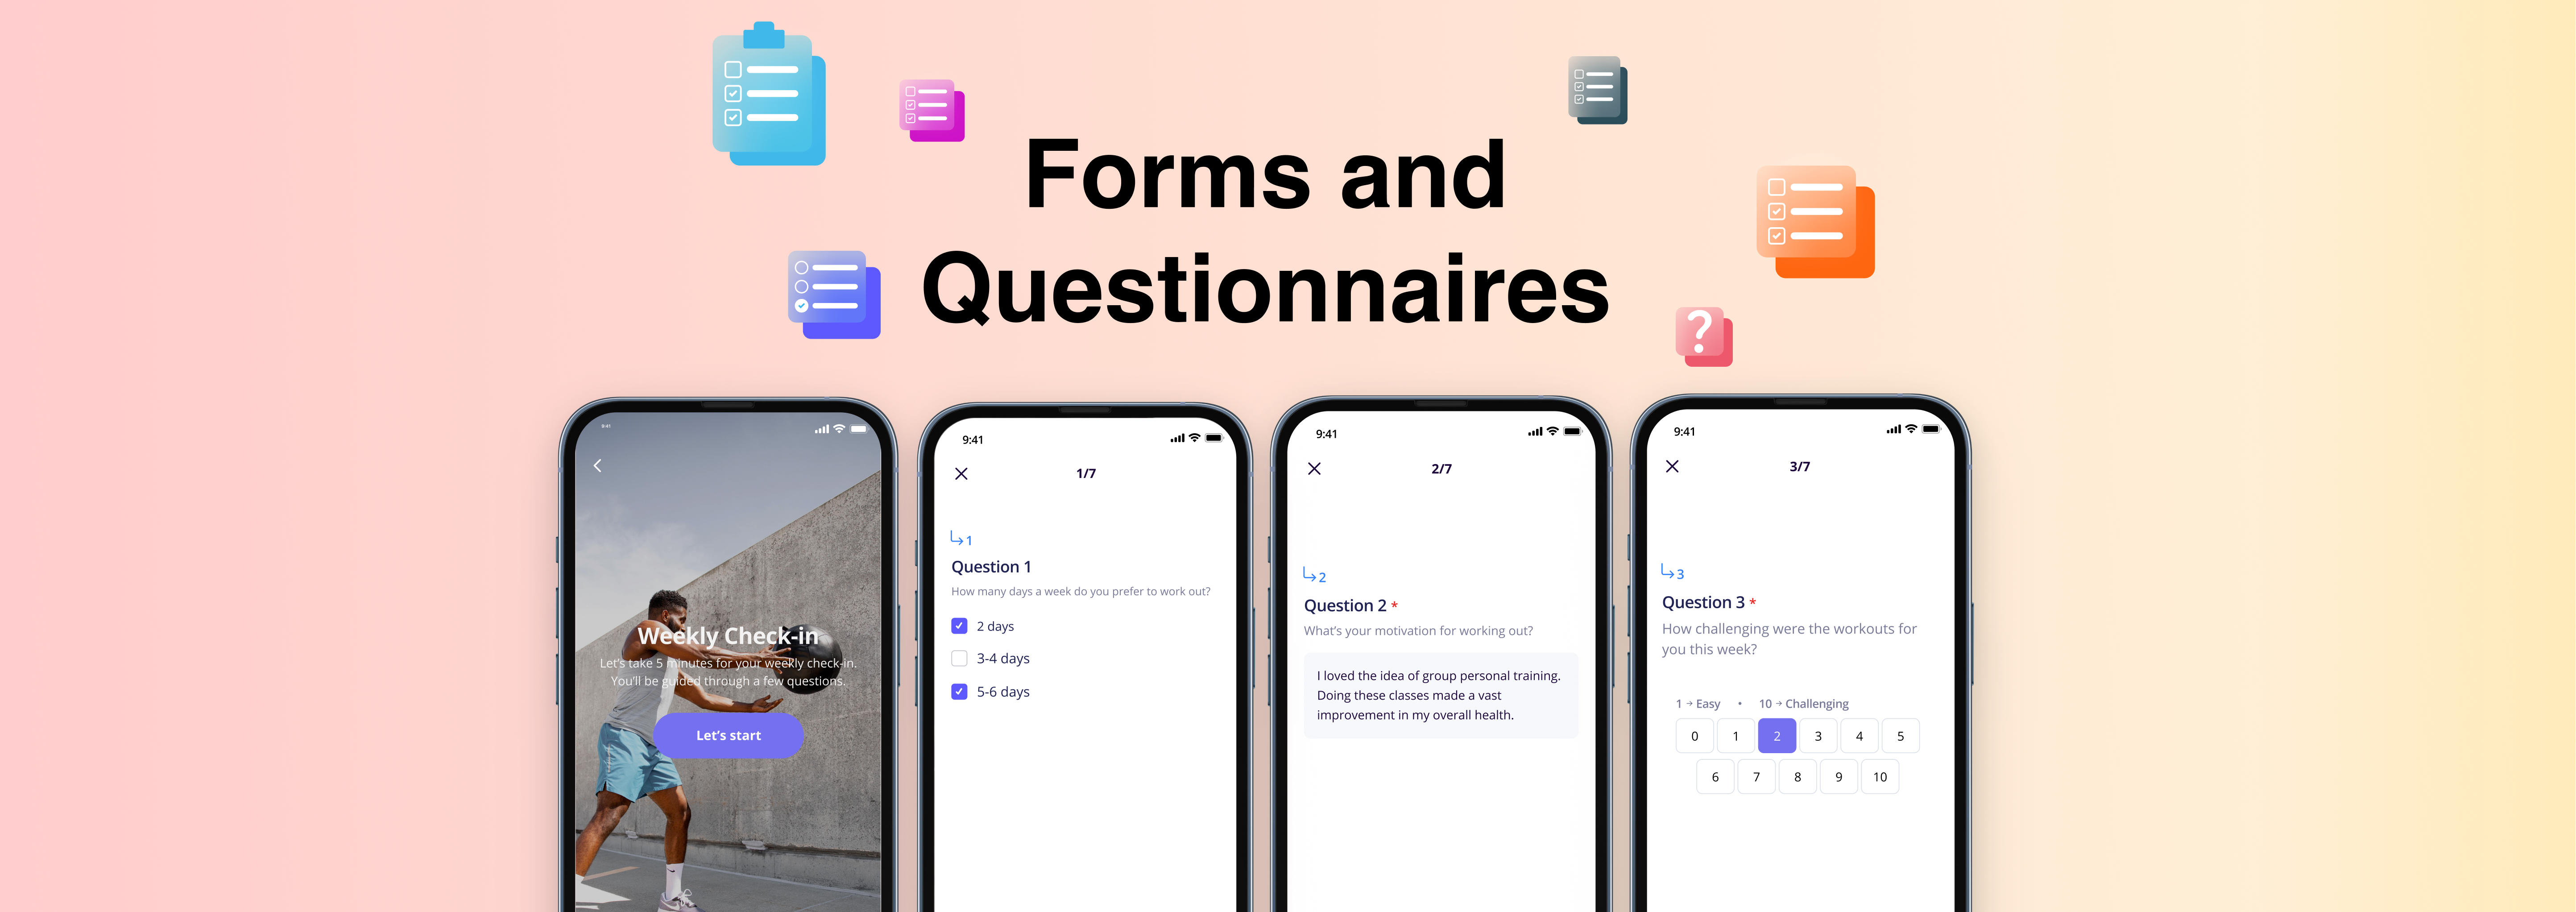 Introducing Forms and Questionnaires!